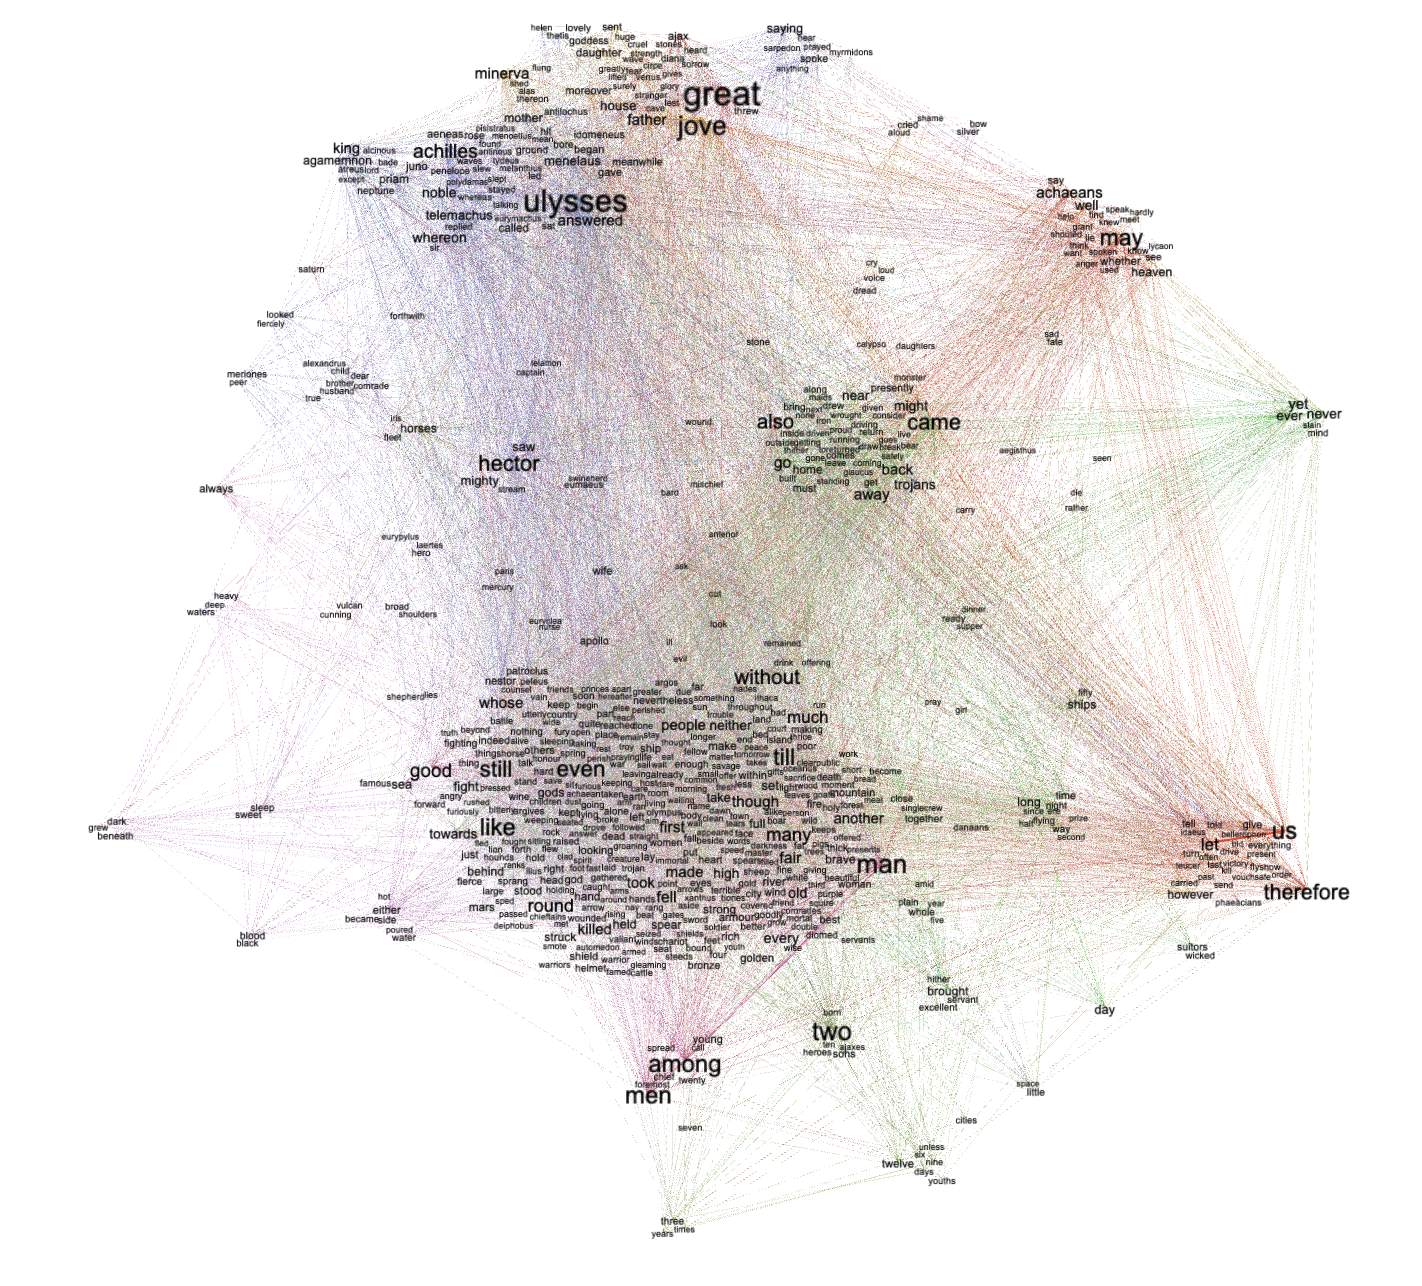 _images/network-03.png